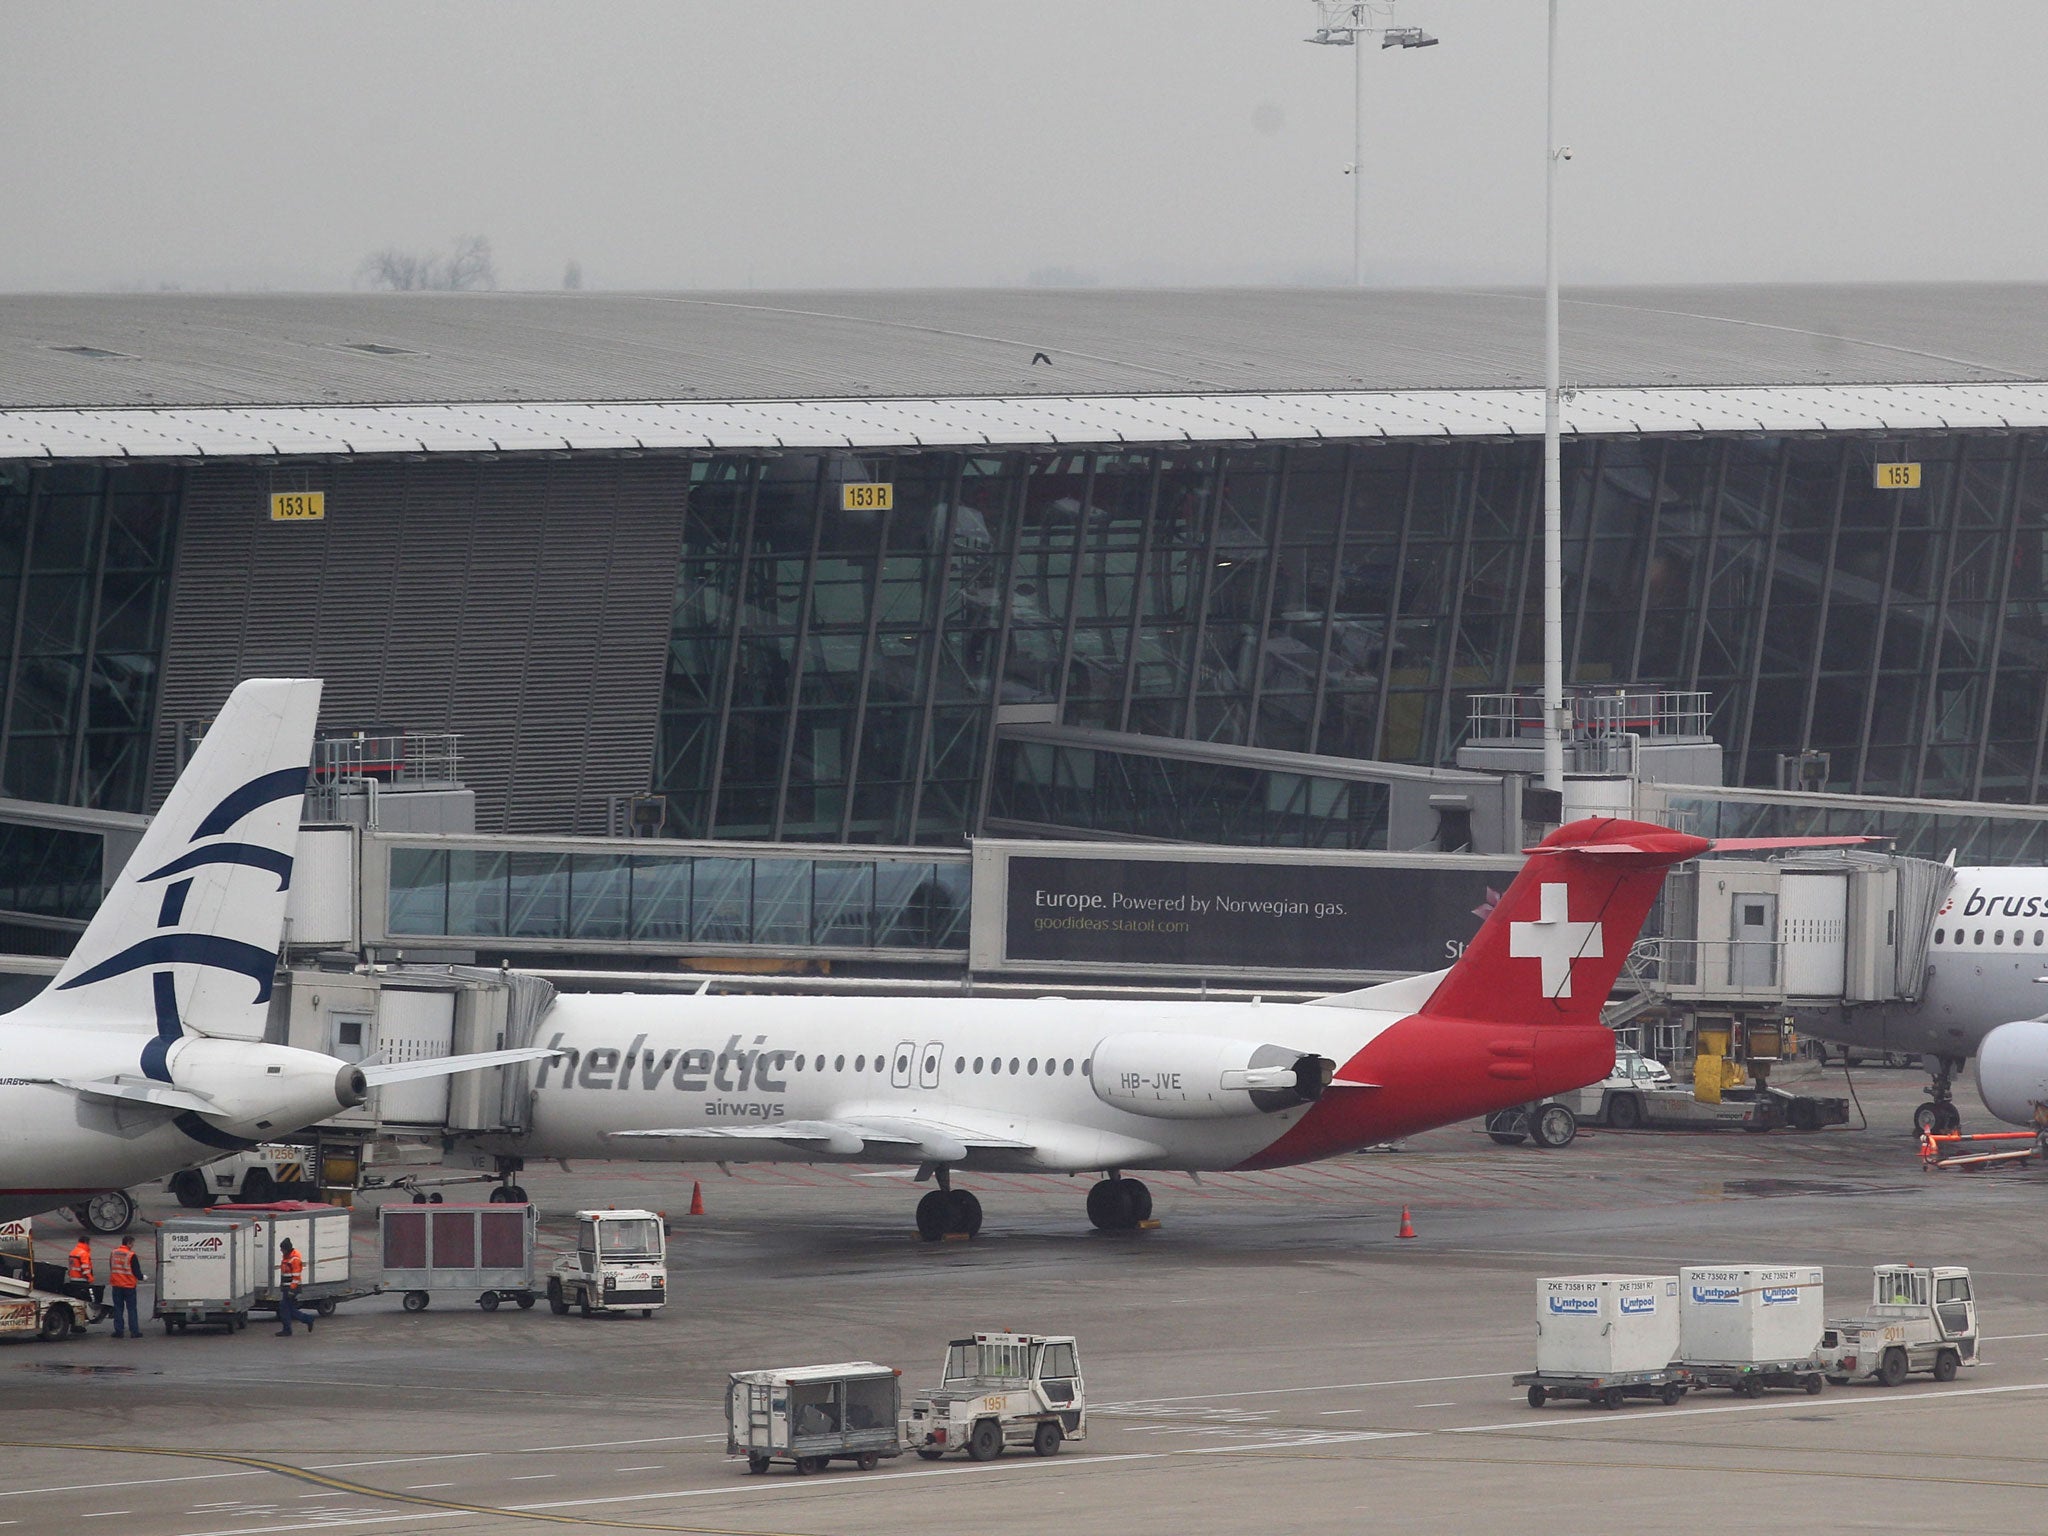 The plane in Brussels that was raided by eight men in February